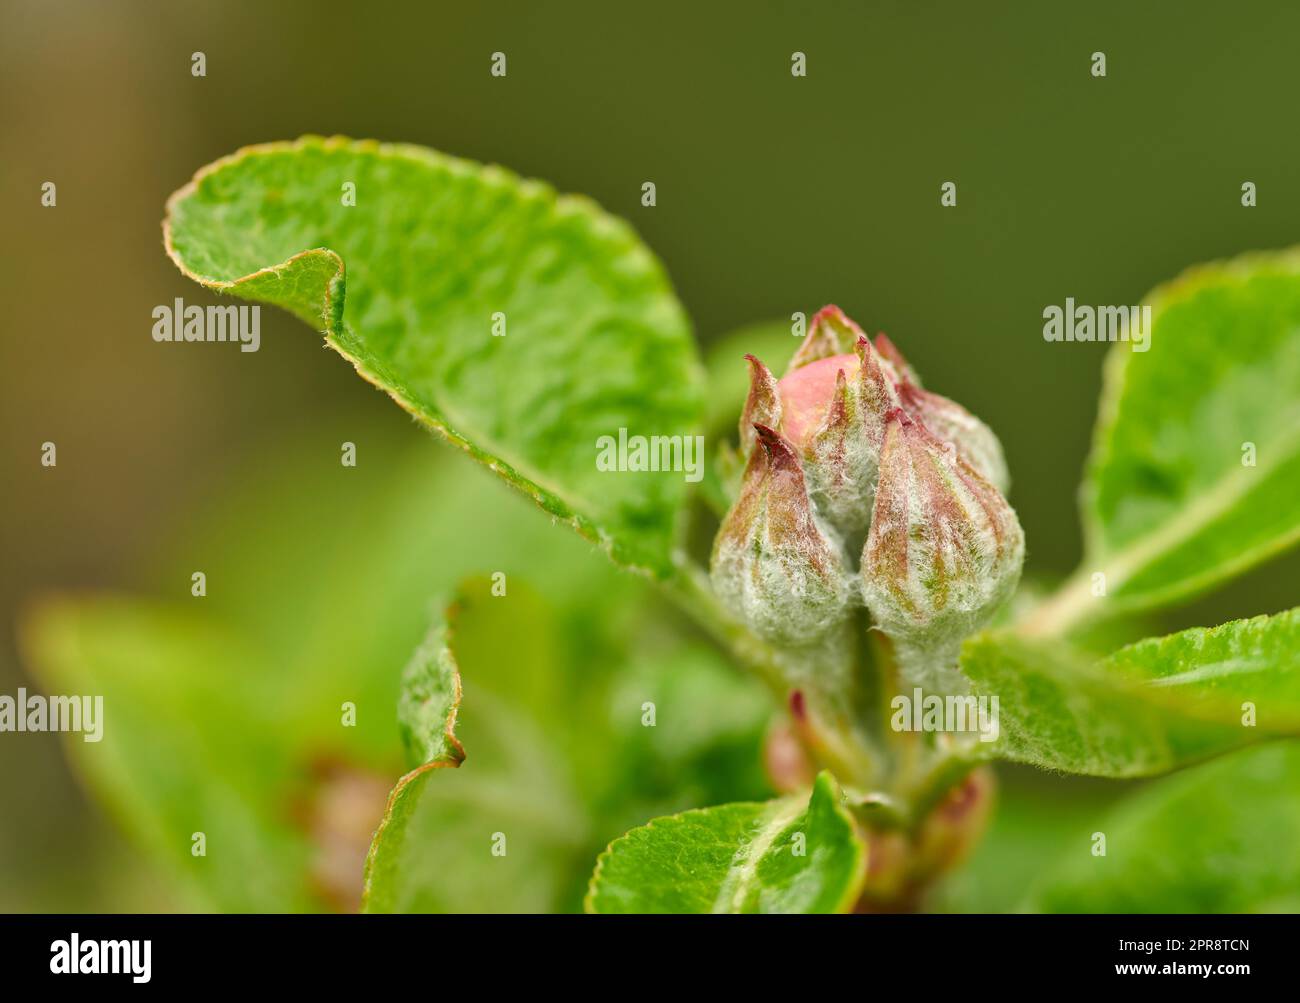 Malus pumila flower growing in a ecological garden with copy space. Closeup of beautiful paradise apple plant blooming and blossoming in nature during spring in an organic meadow or field environment Stock Photo